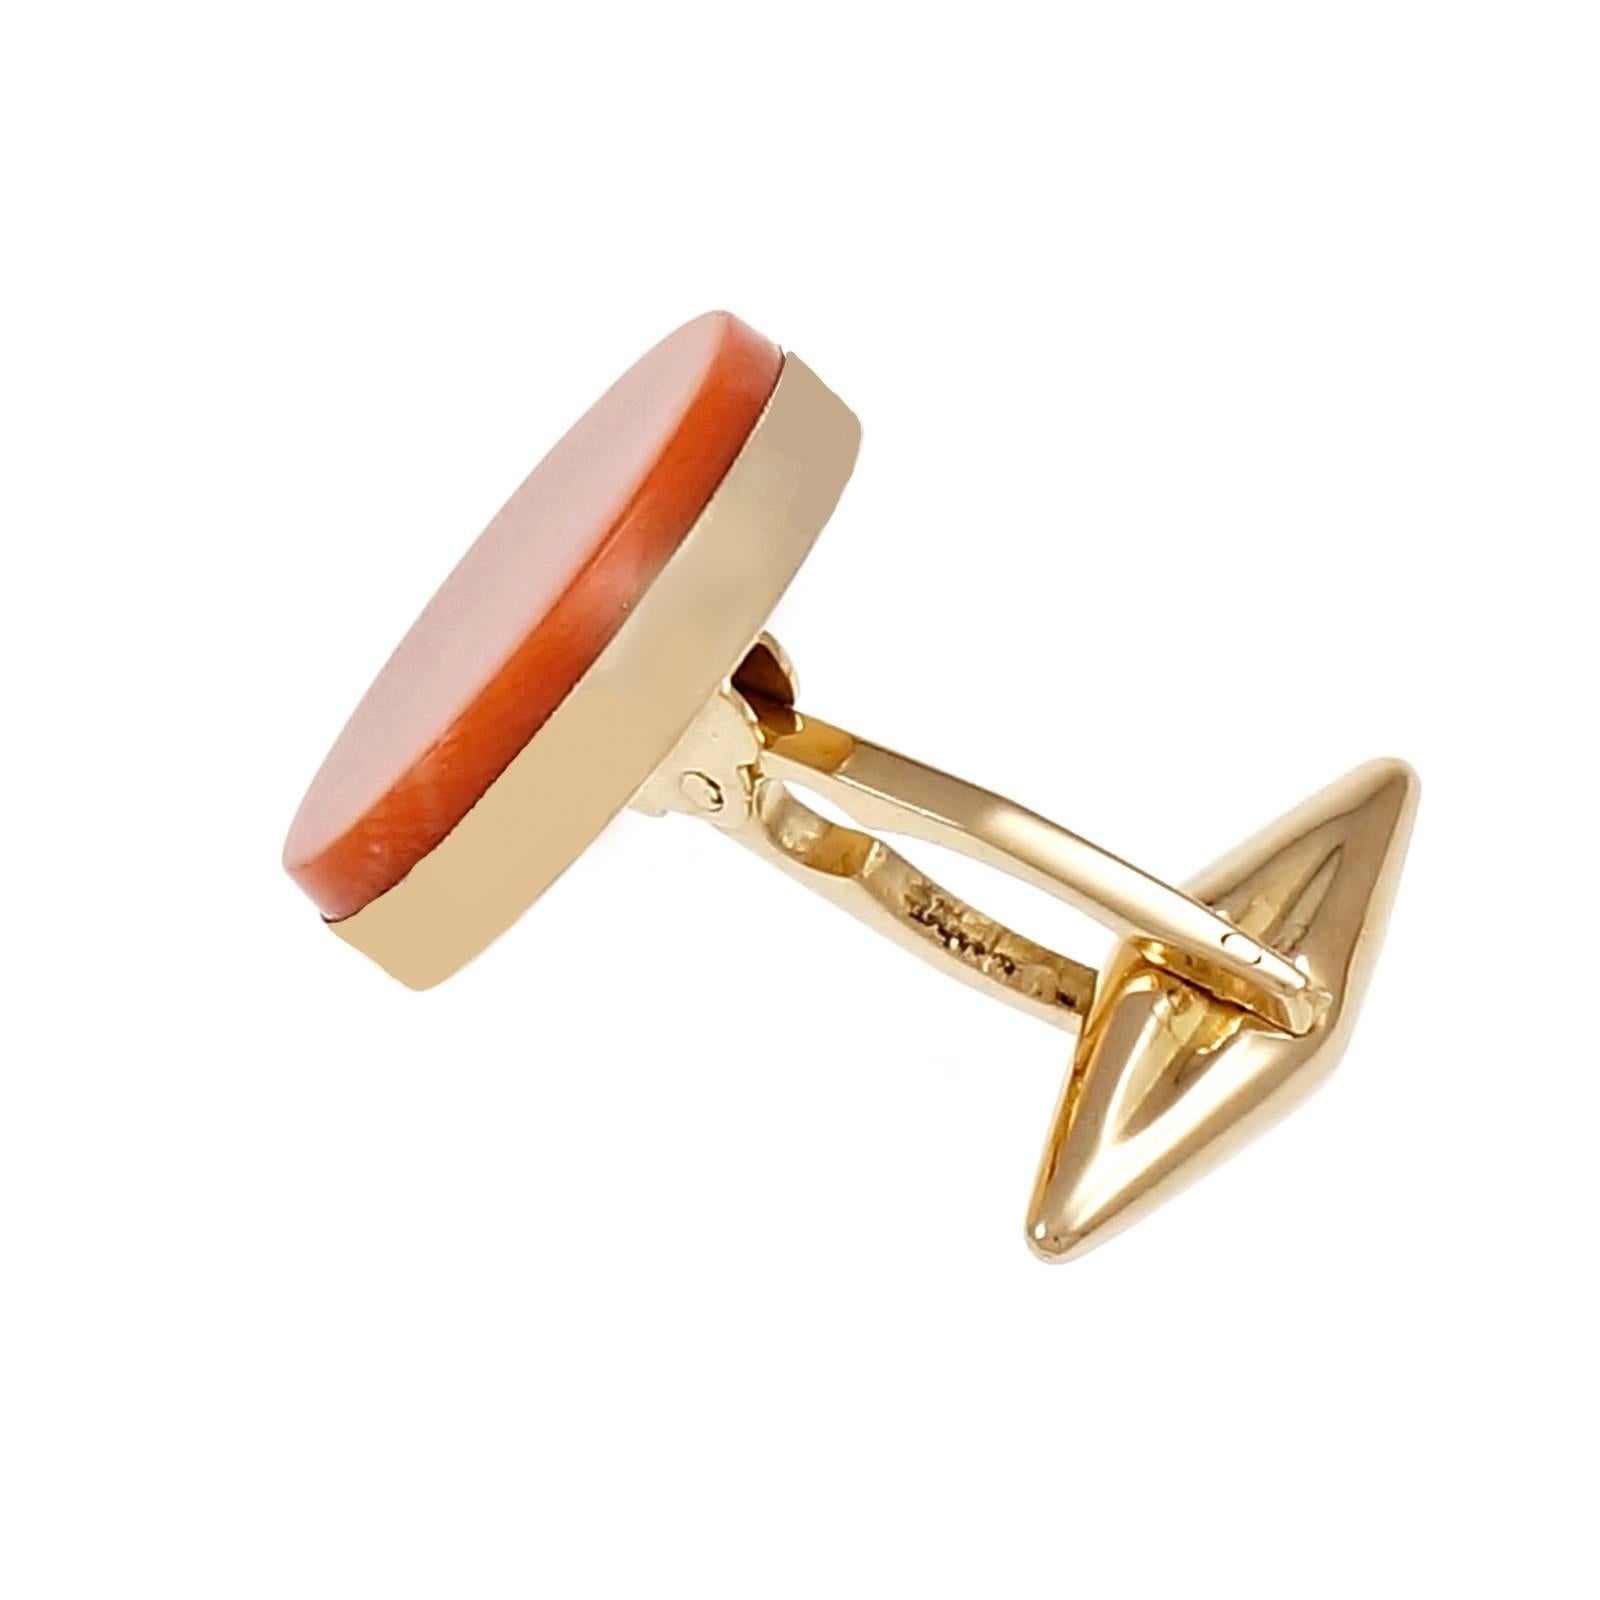 1960-1969 fantastic bright pinkish orange certified untreated handmade hinged back Coral cuff links in 18k yellow gold.

2 oval pinkish orange Salmon Coral, untreated, 17.55 x 12.30mm, GIA certificate #1176627966
18k yellow gold
Tested: